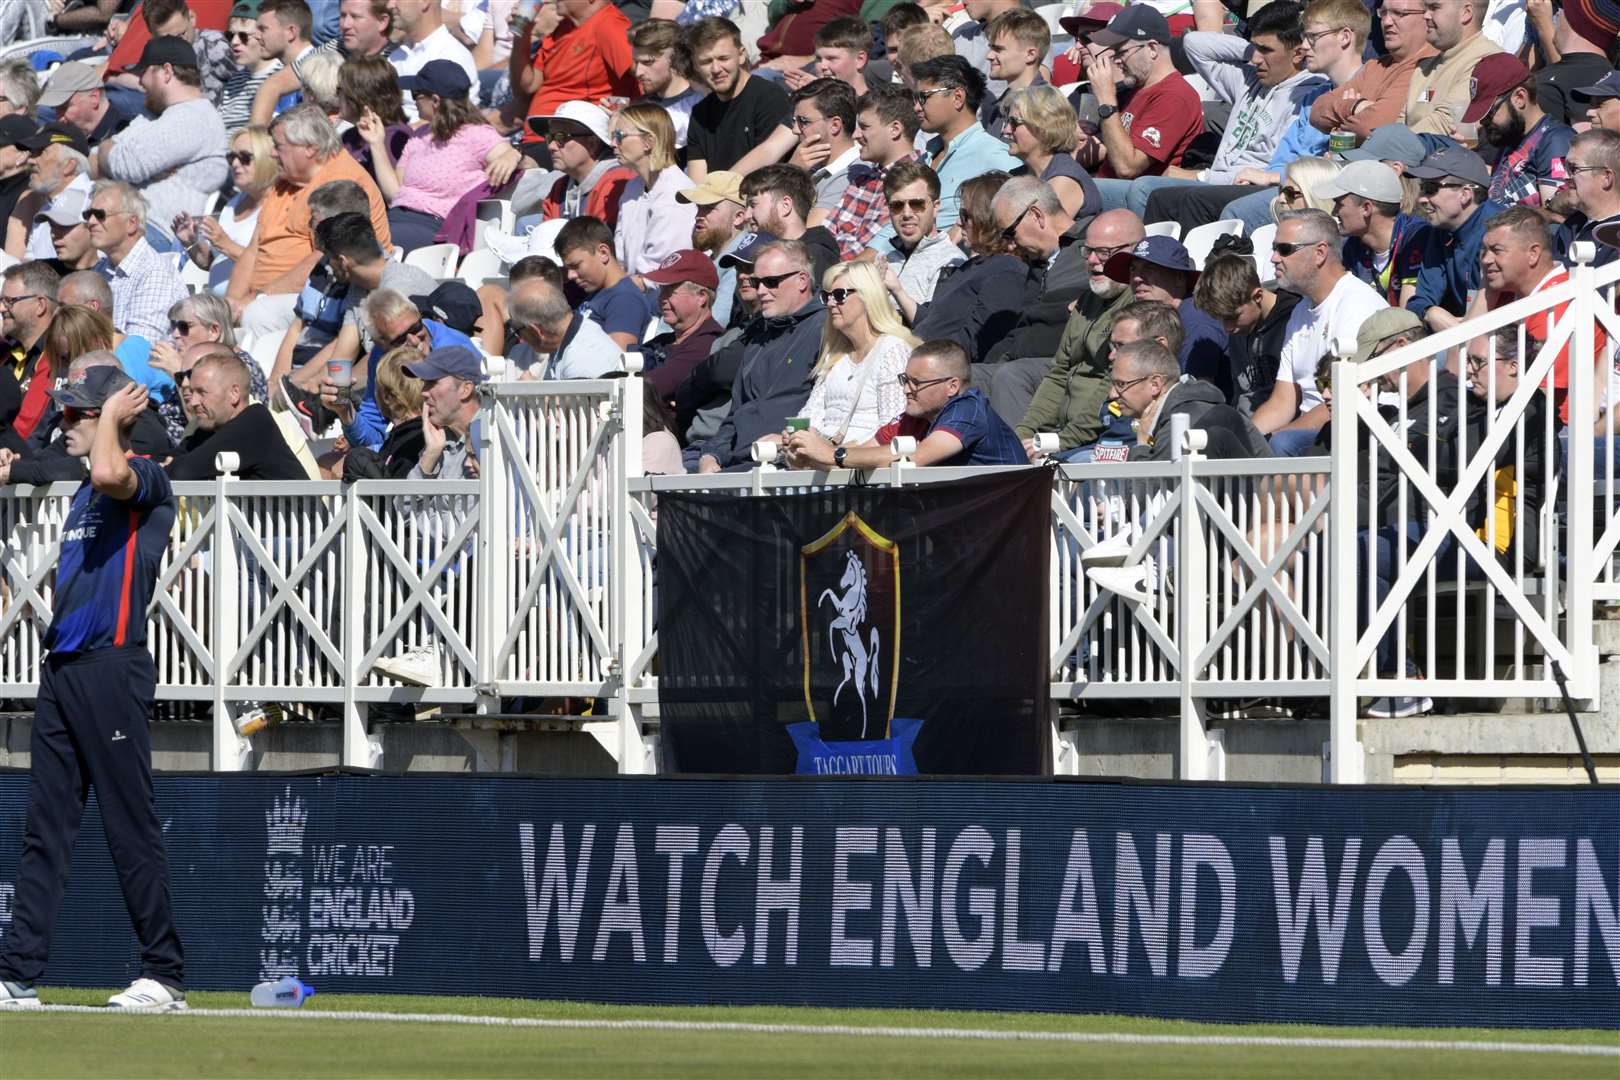 Kent fans show their support at Trent Bridge. Picture: Barry Goodwin